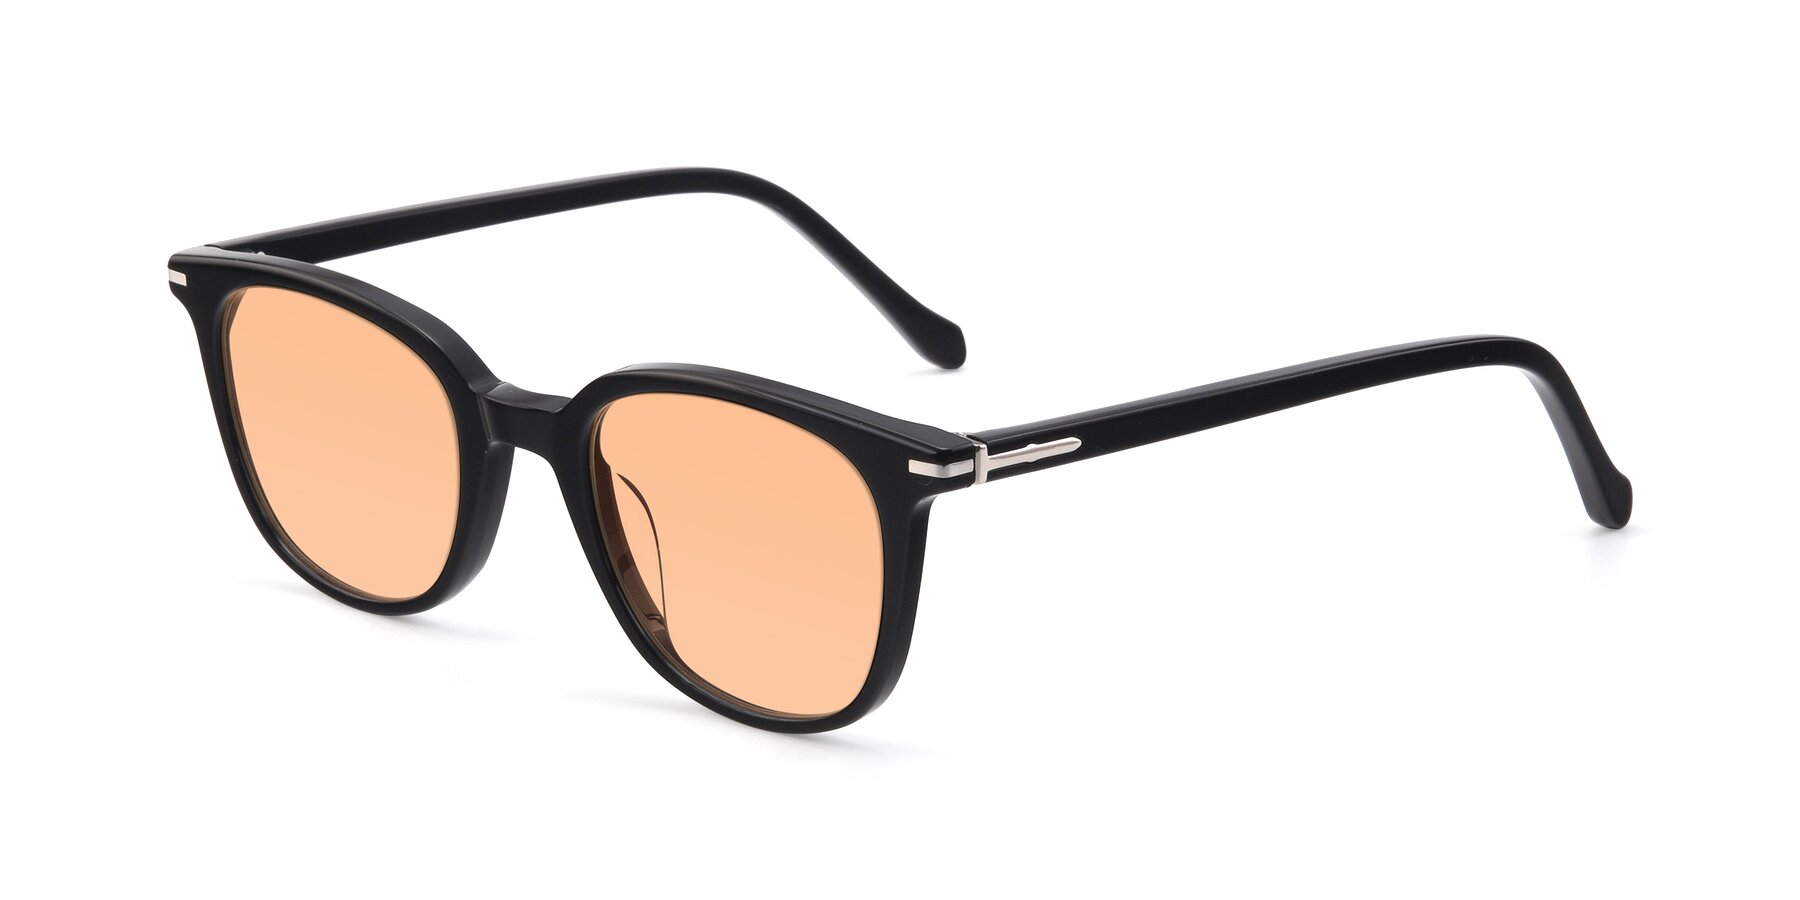 Angle of 17562 in Black with Light Orange Tinted Lenses